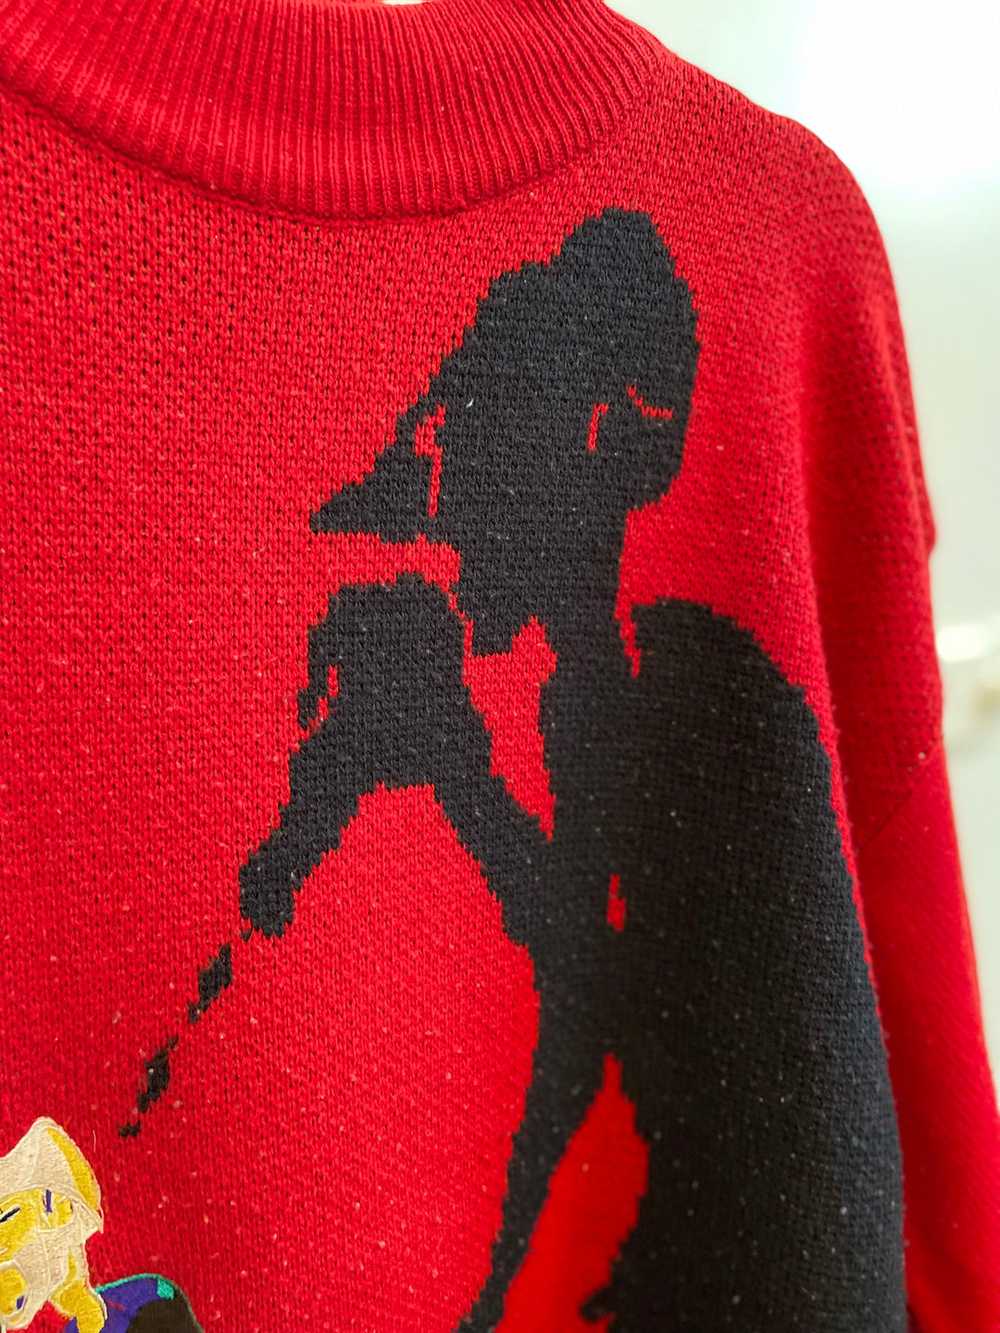 80s to 90s rap icon sweater - image 4